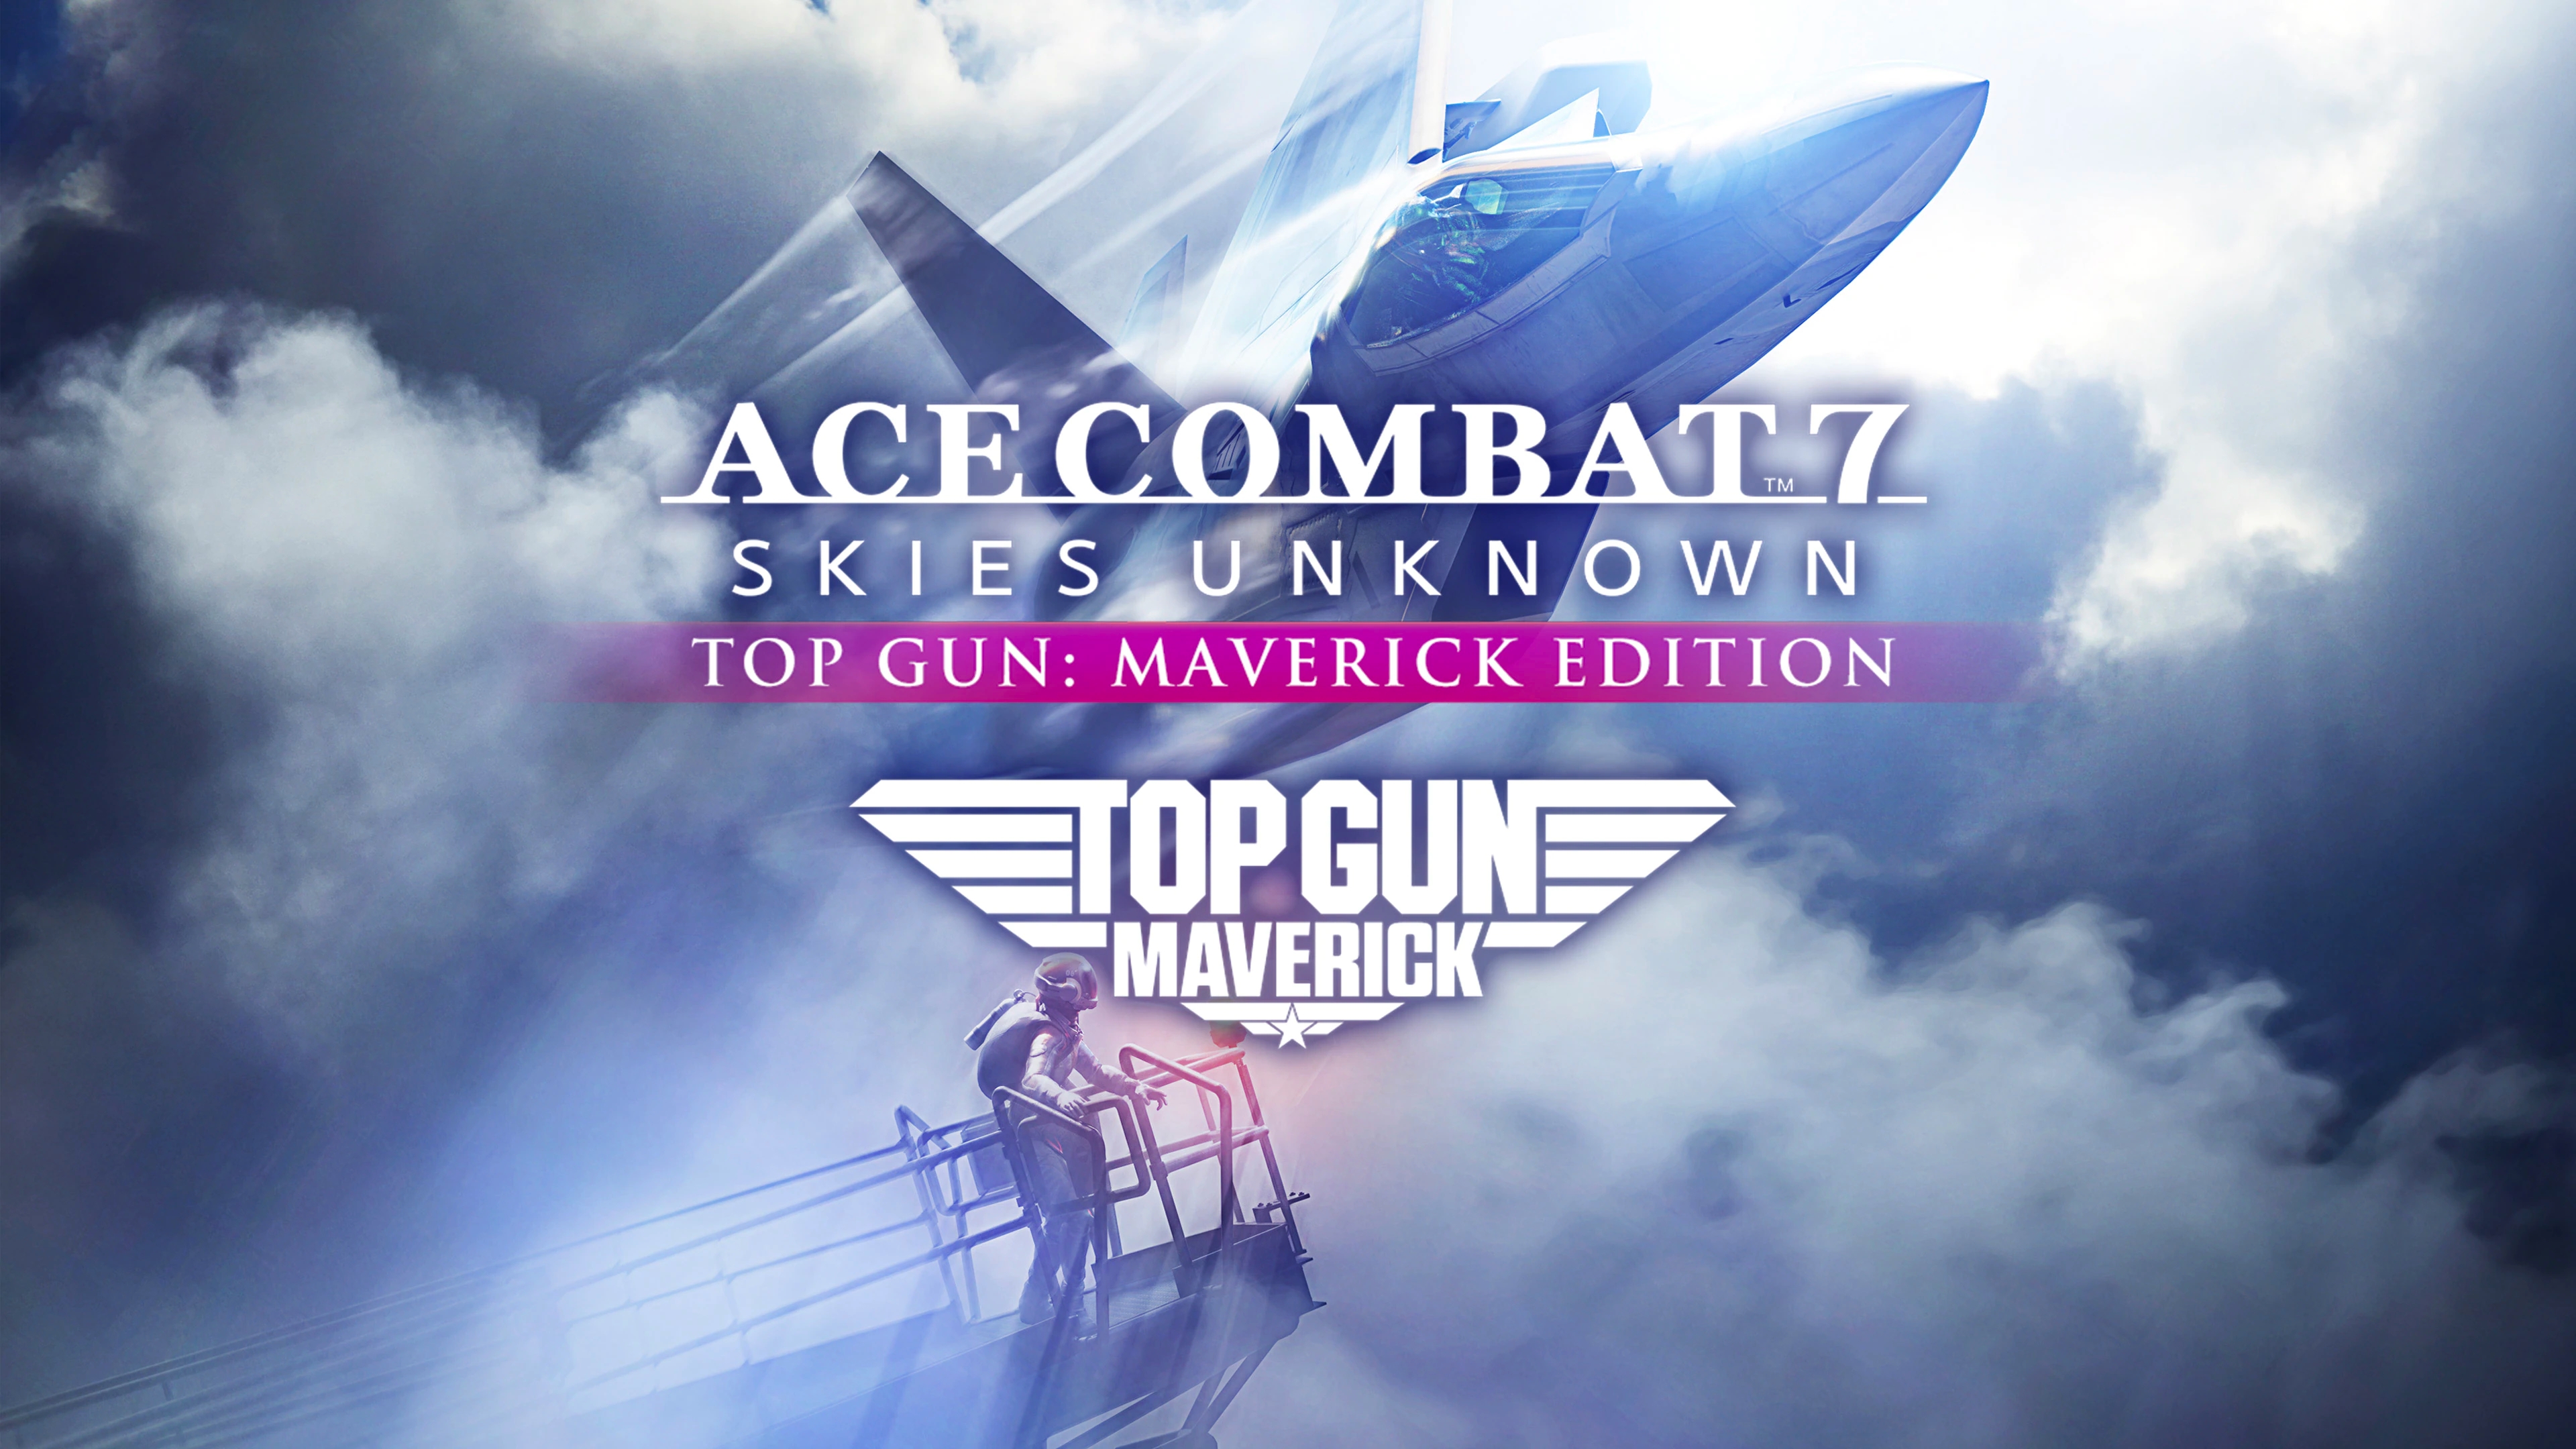 Ace Combat 7: Skies Unknown - Game Overview